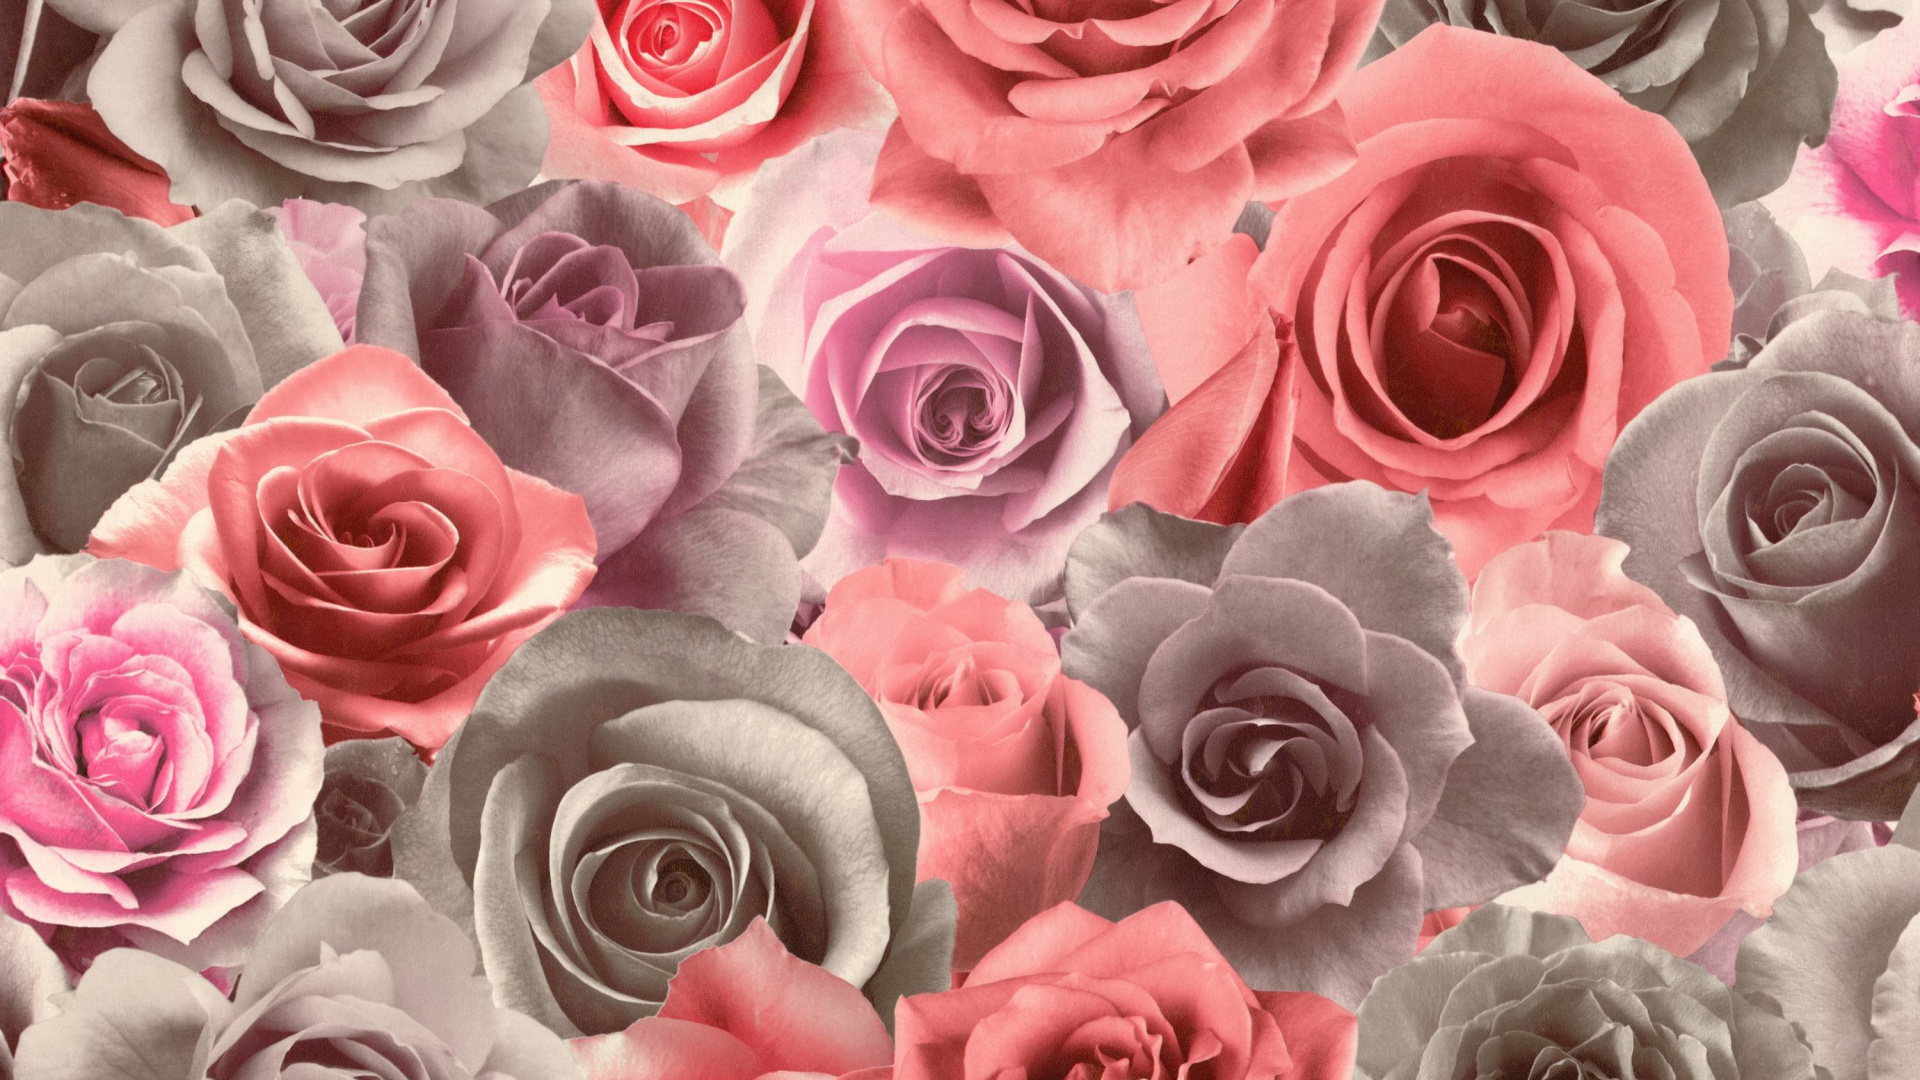 Pink Roses in Close up Photography. Wallpaper in 1920x1080 Resolution